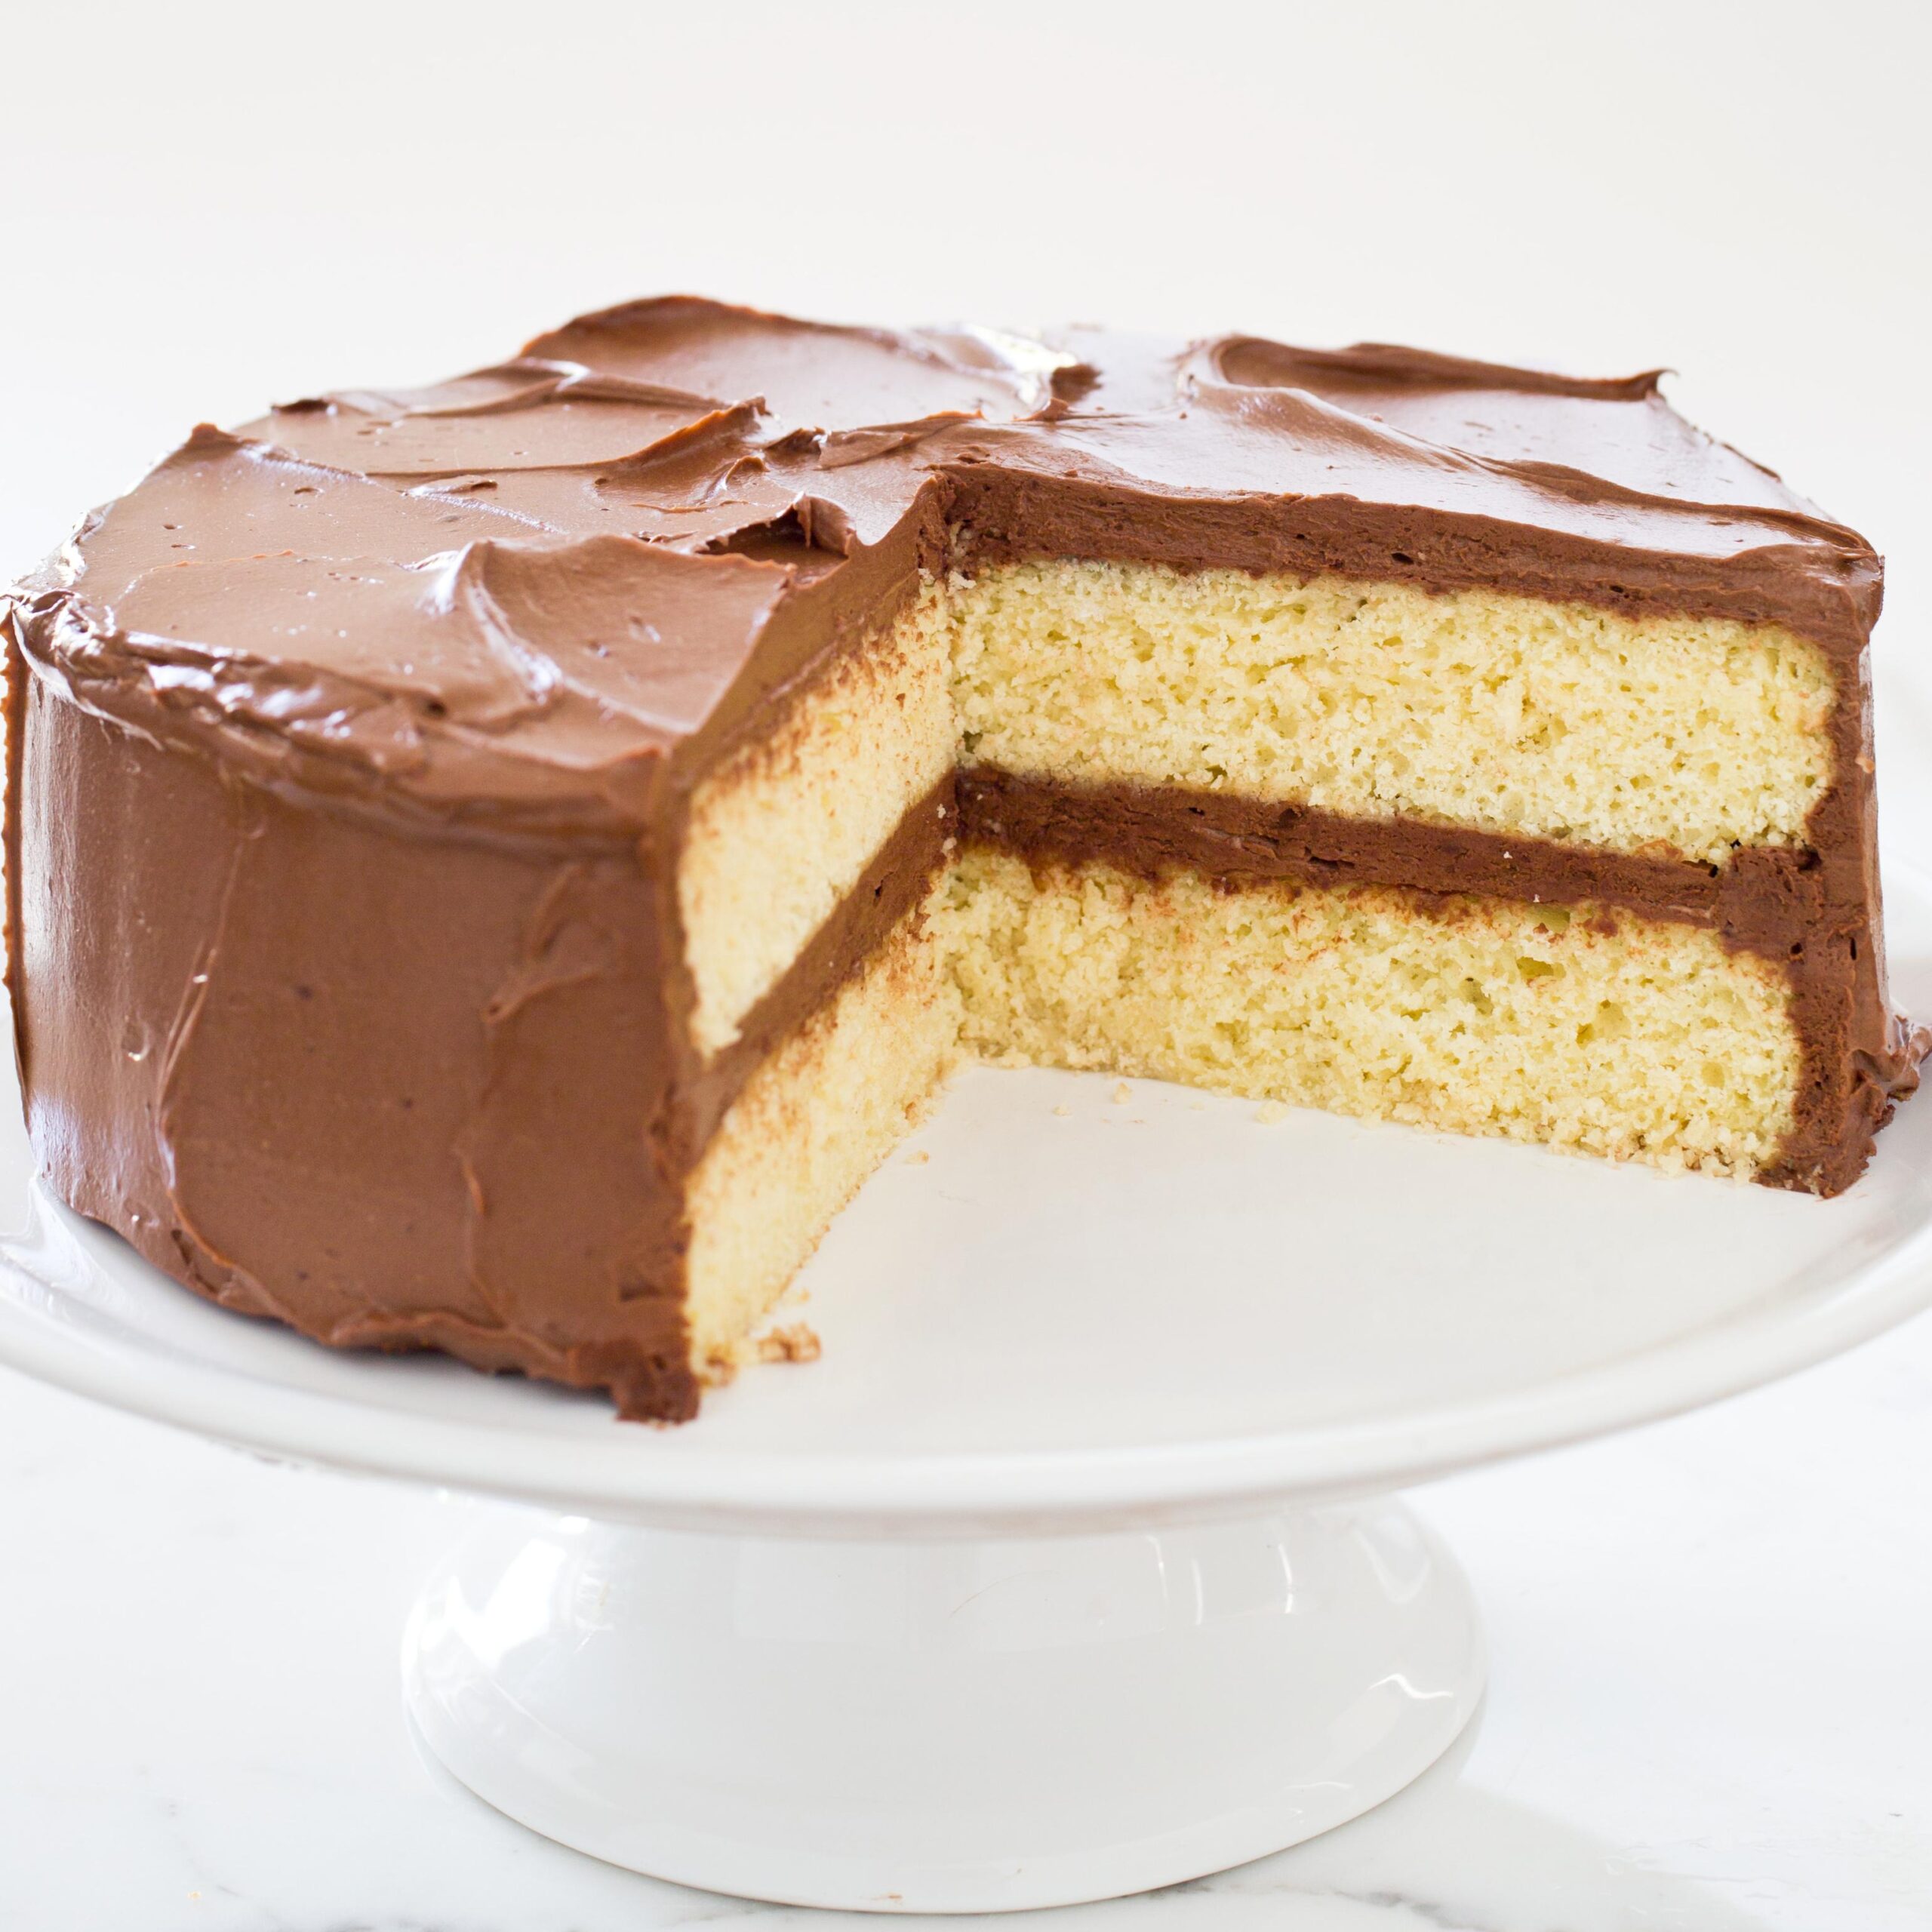  Moist and fluffy, this gluten-free yellow cake is a perfect treat for any occasion!